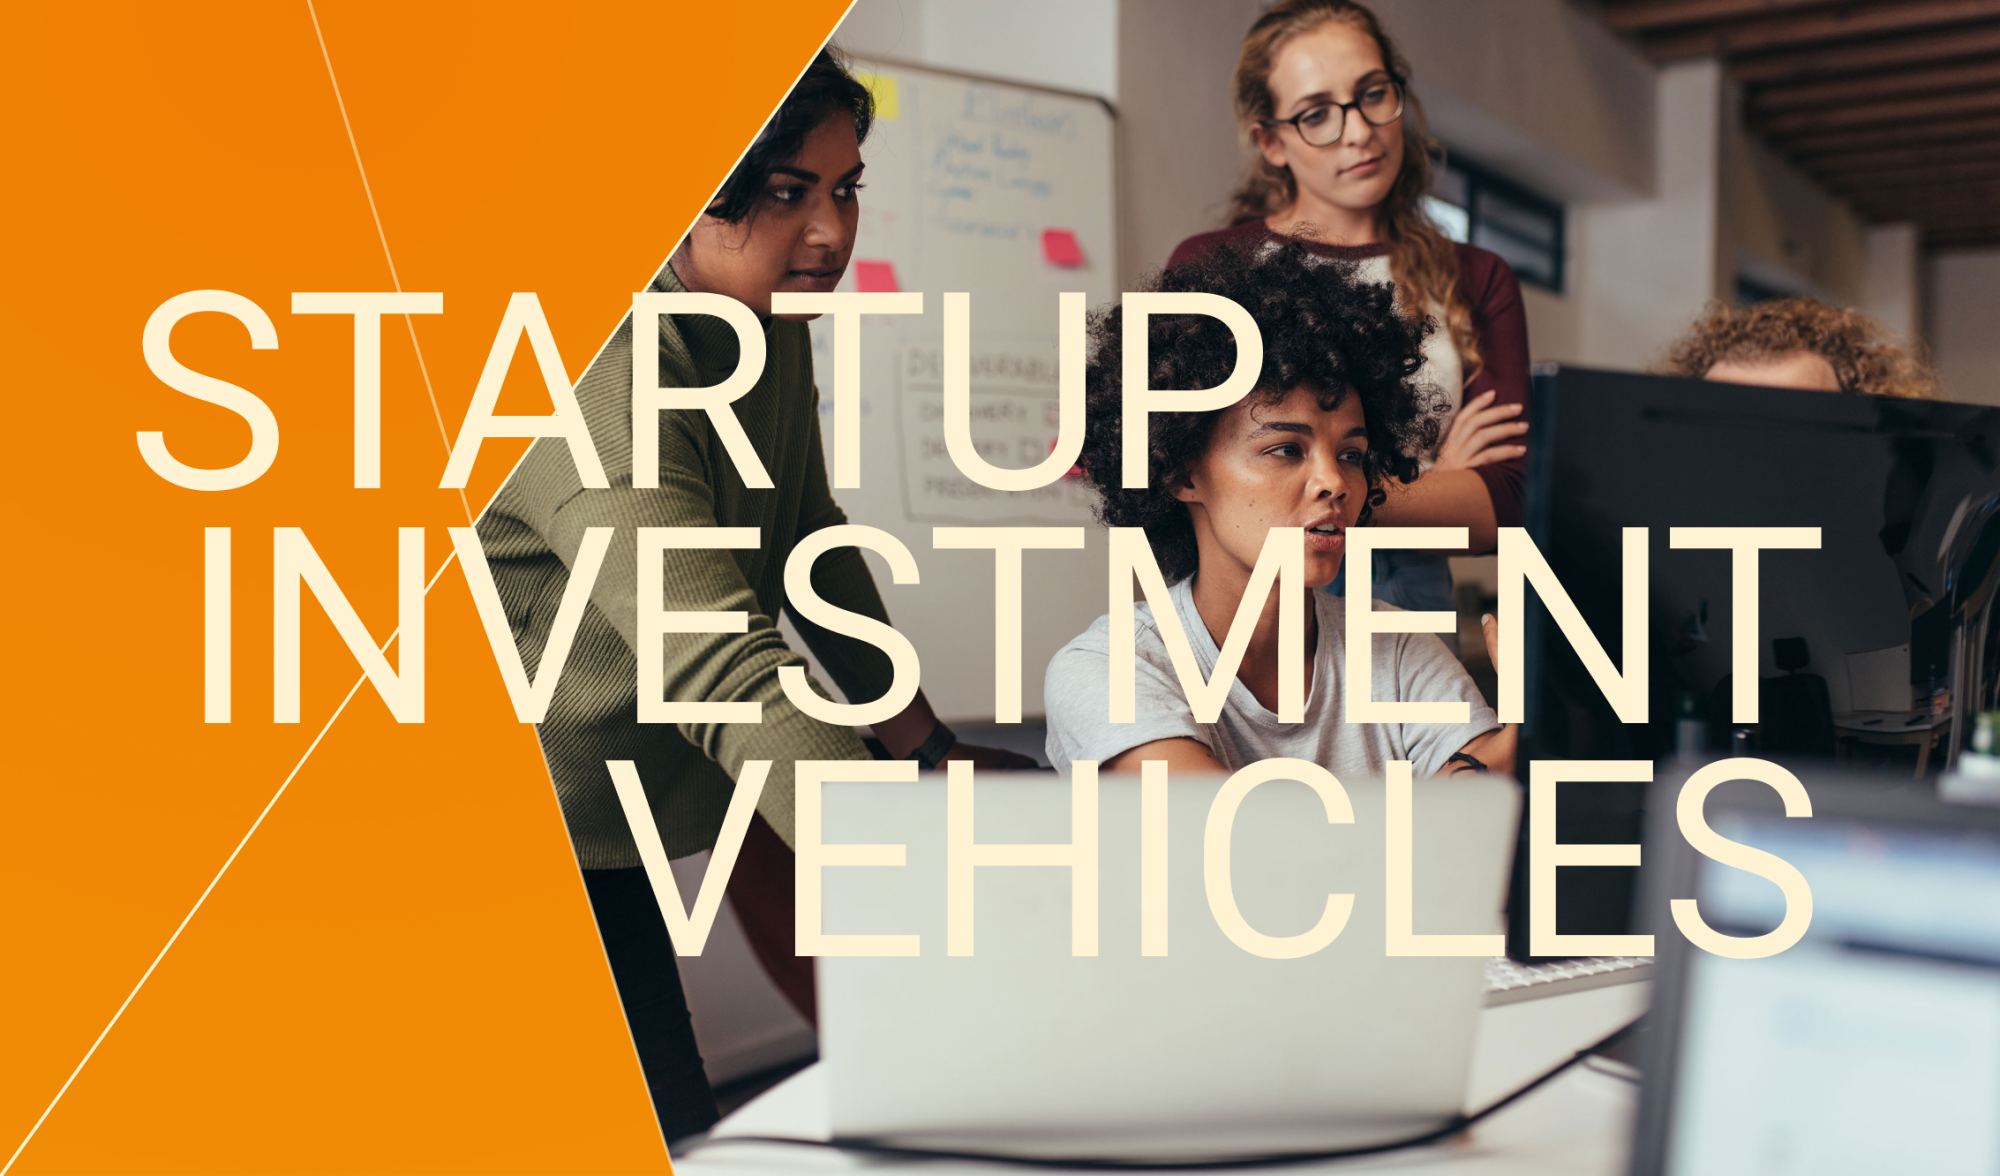 Startup Investment Vehicles